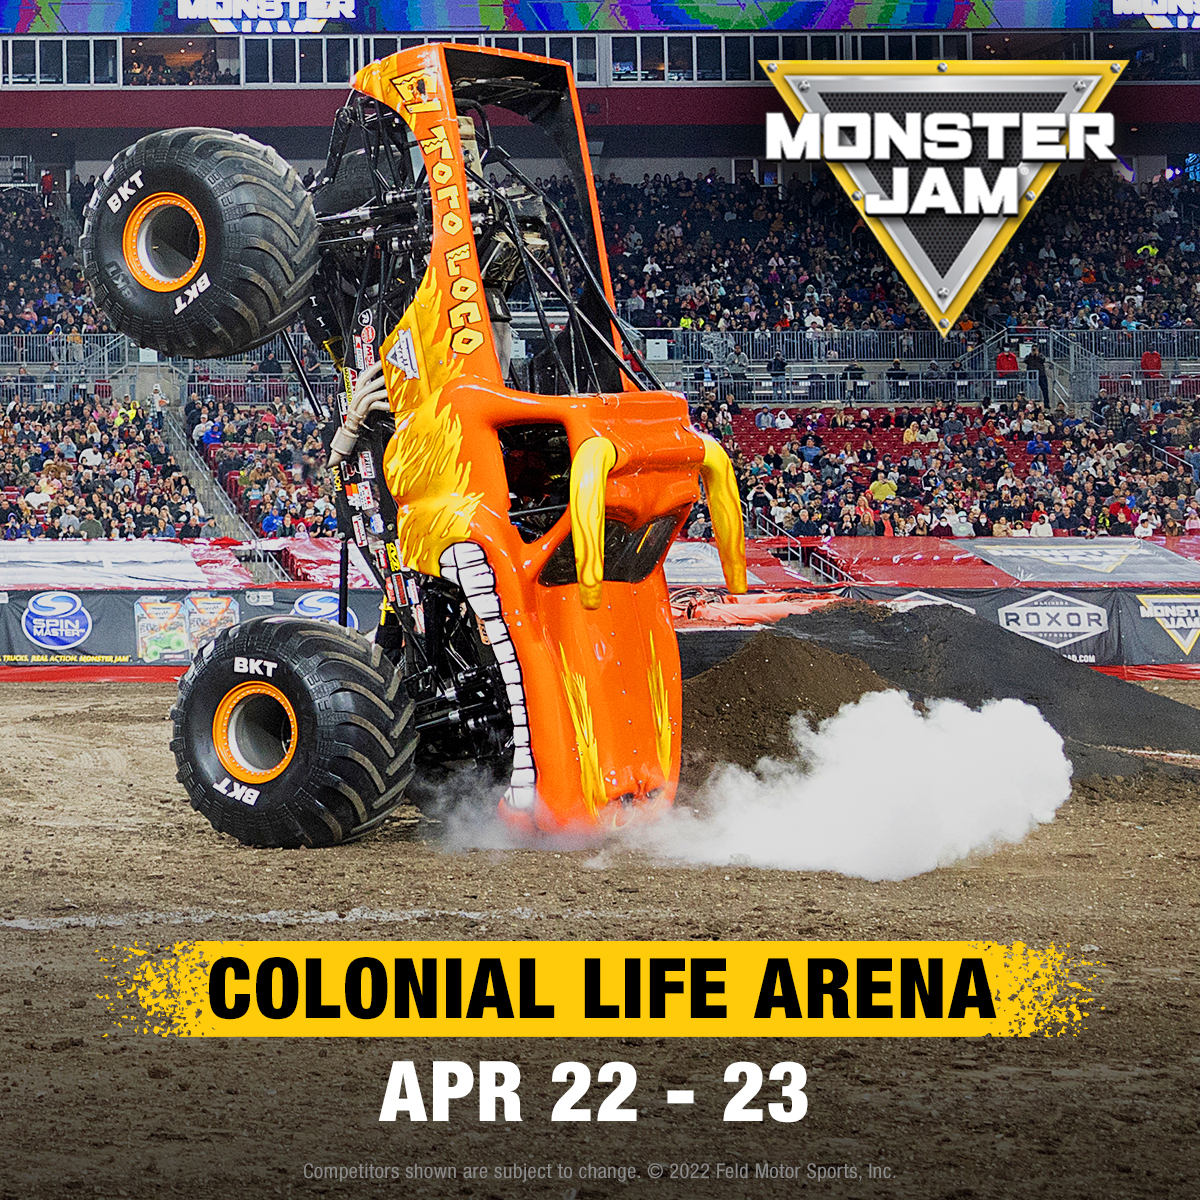 <h1 class="tribe-events-single-event-title">HOT Cash Contest Sponsored by Monster Jam</h1>